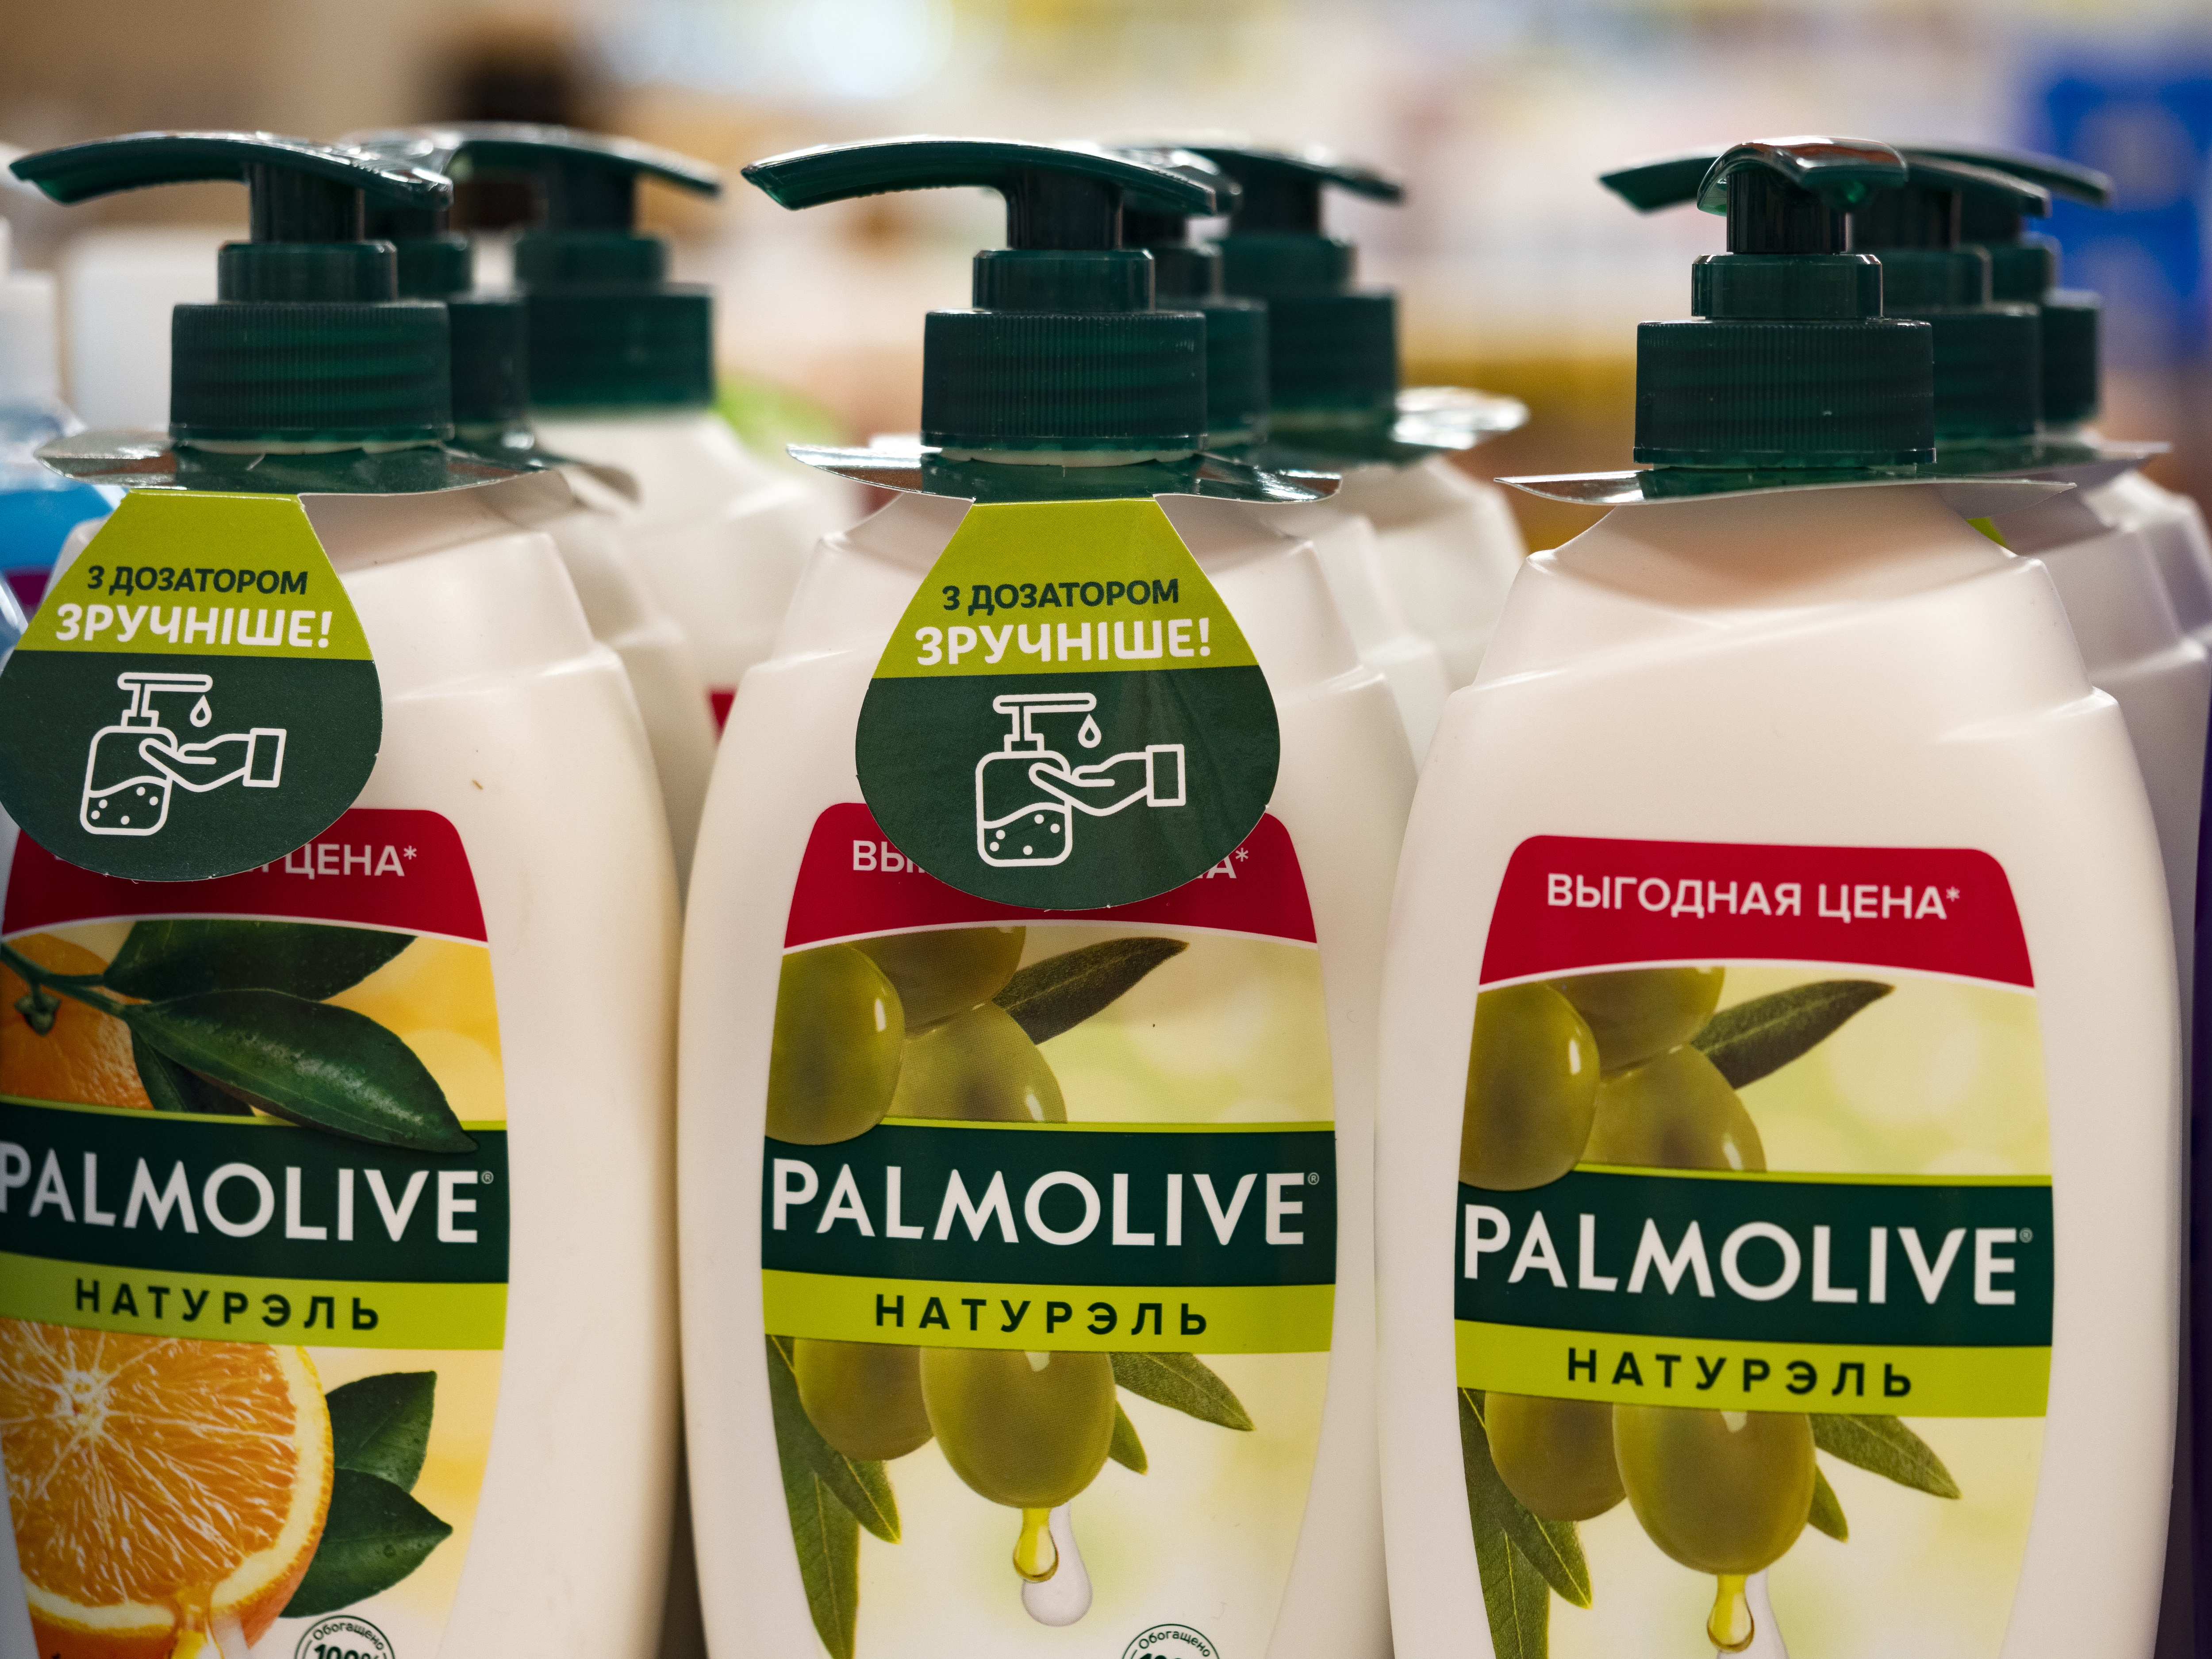 Shower Gel Palmolive Naturel displayed in a store on June 30, 2021 in Ukraine | Source: Getty Images